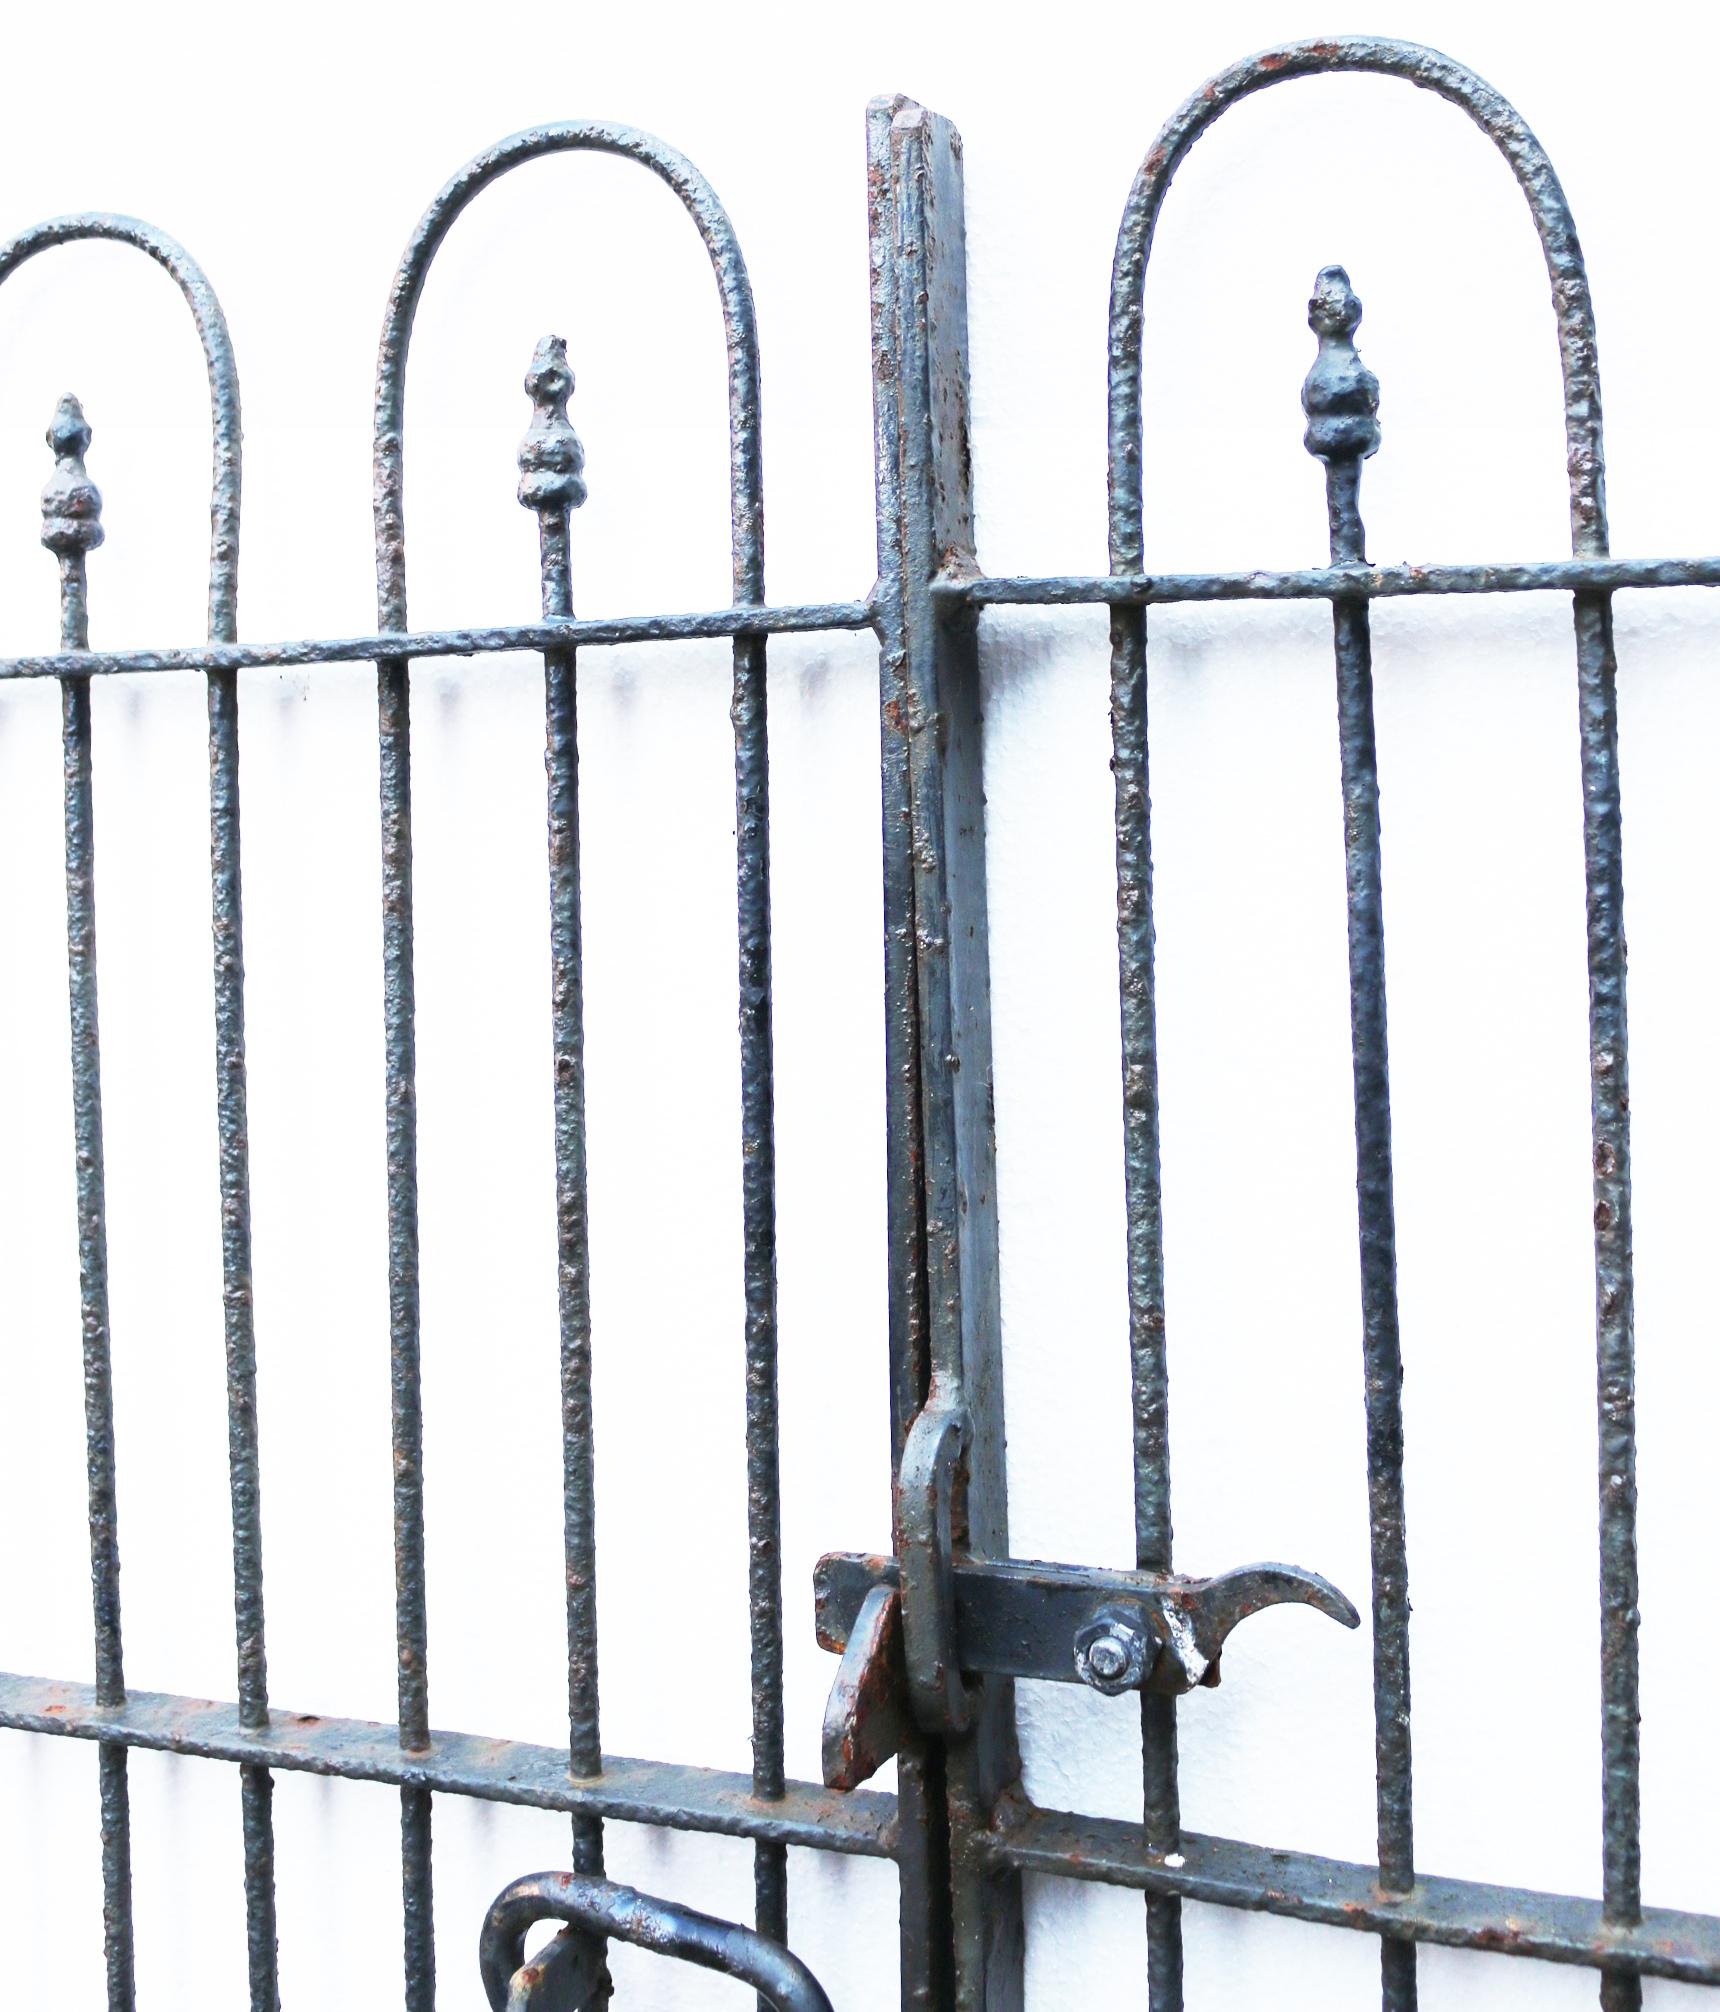 About

A pair of wrought iron gates featuring a hoop top design. 

Condition report

These gates have hinges, gate stay, posts and a working latch present. Finished in old black paint and in good condition. Posts were previously fixed to